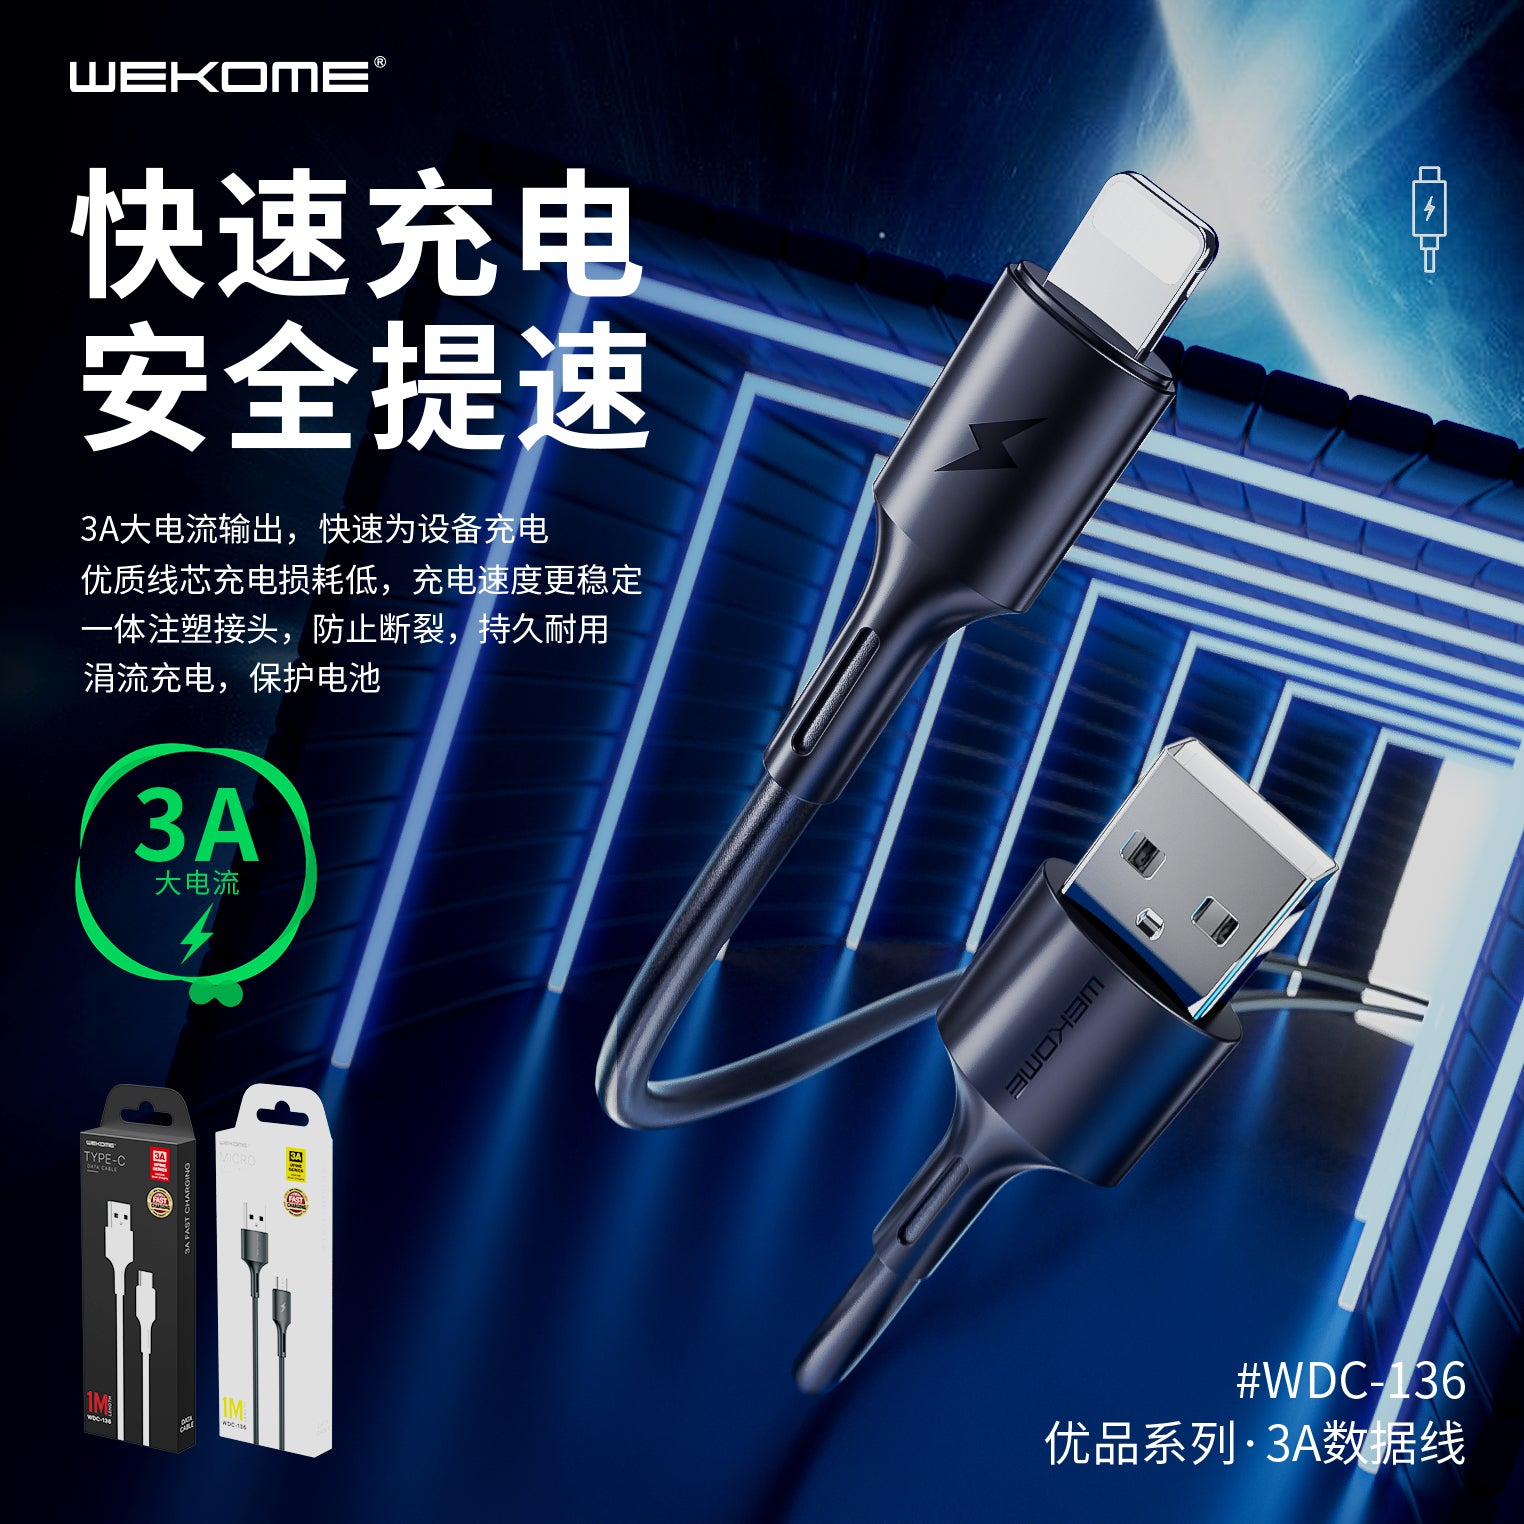 WDC-136 3A Upine Series Fast Charging Cable